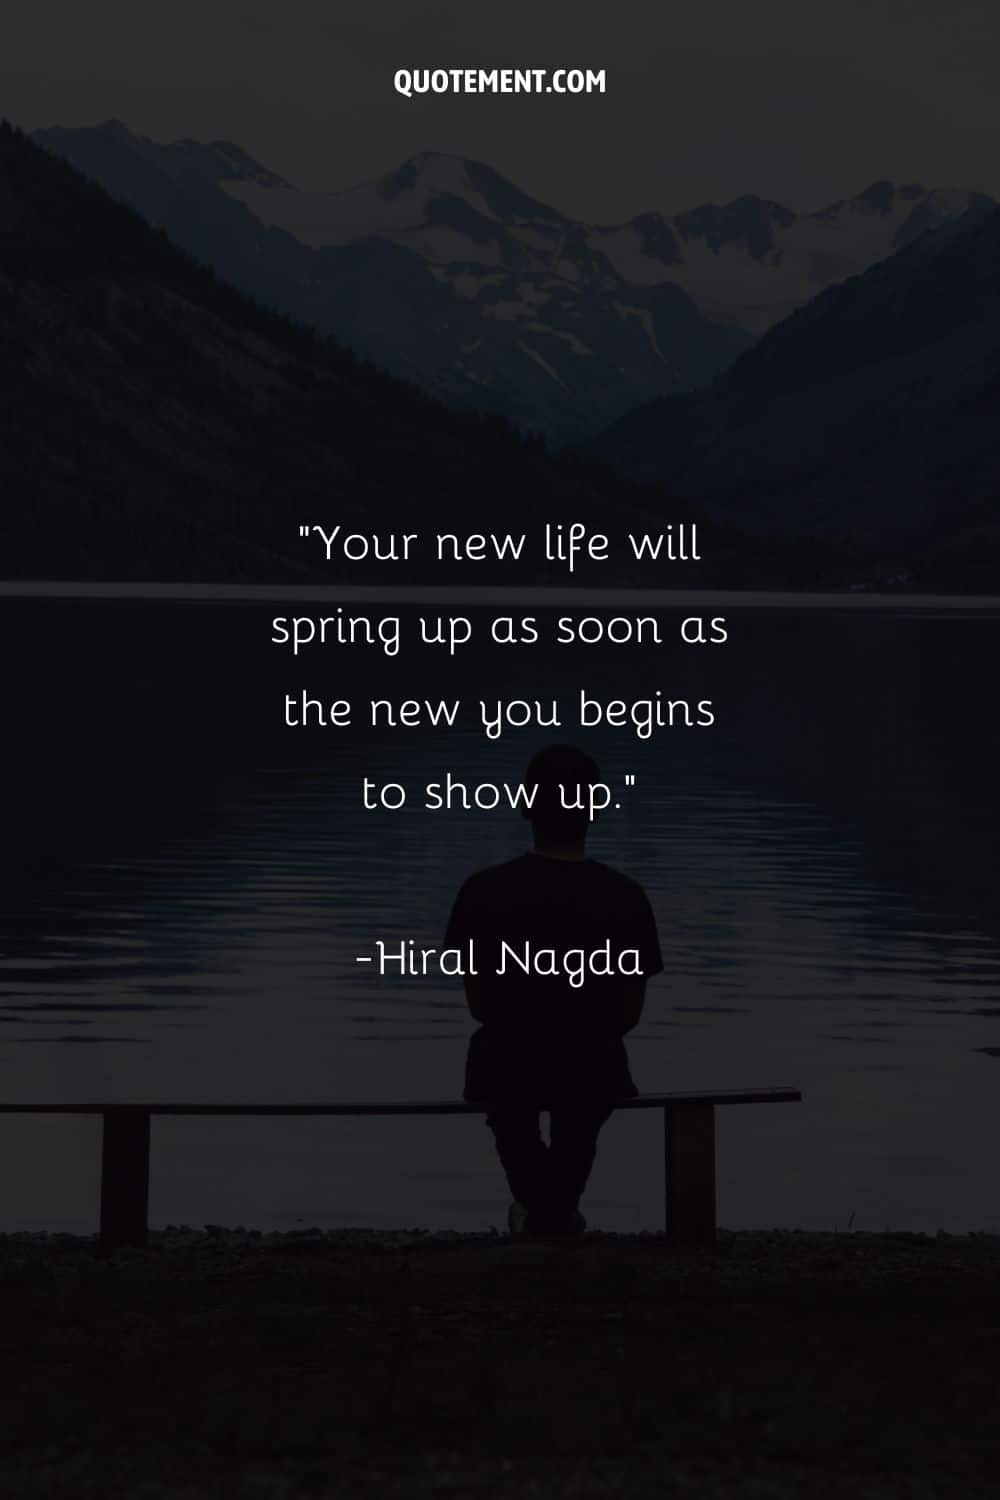 Image of a person seated by water representing a new life quote